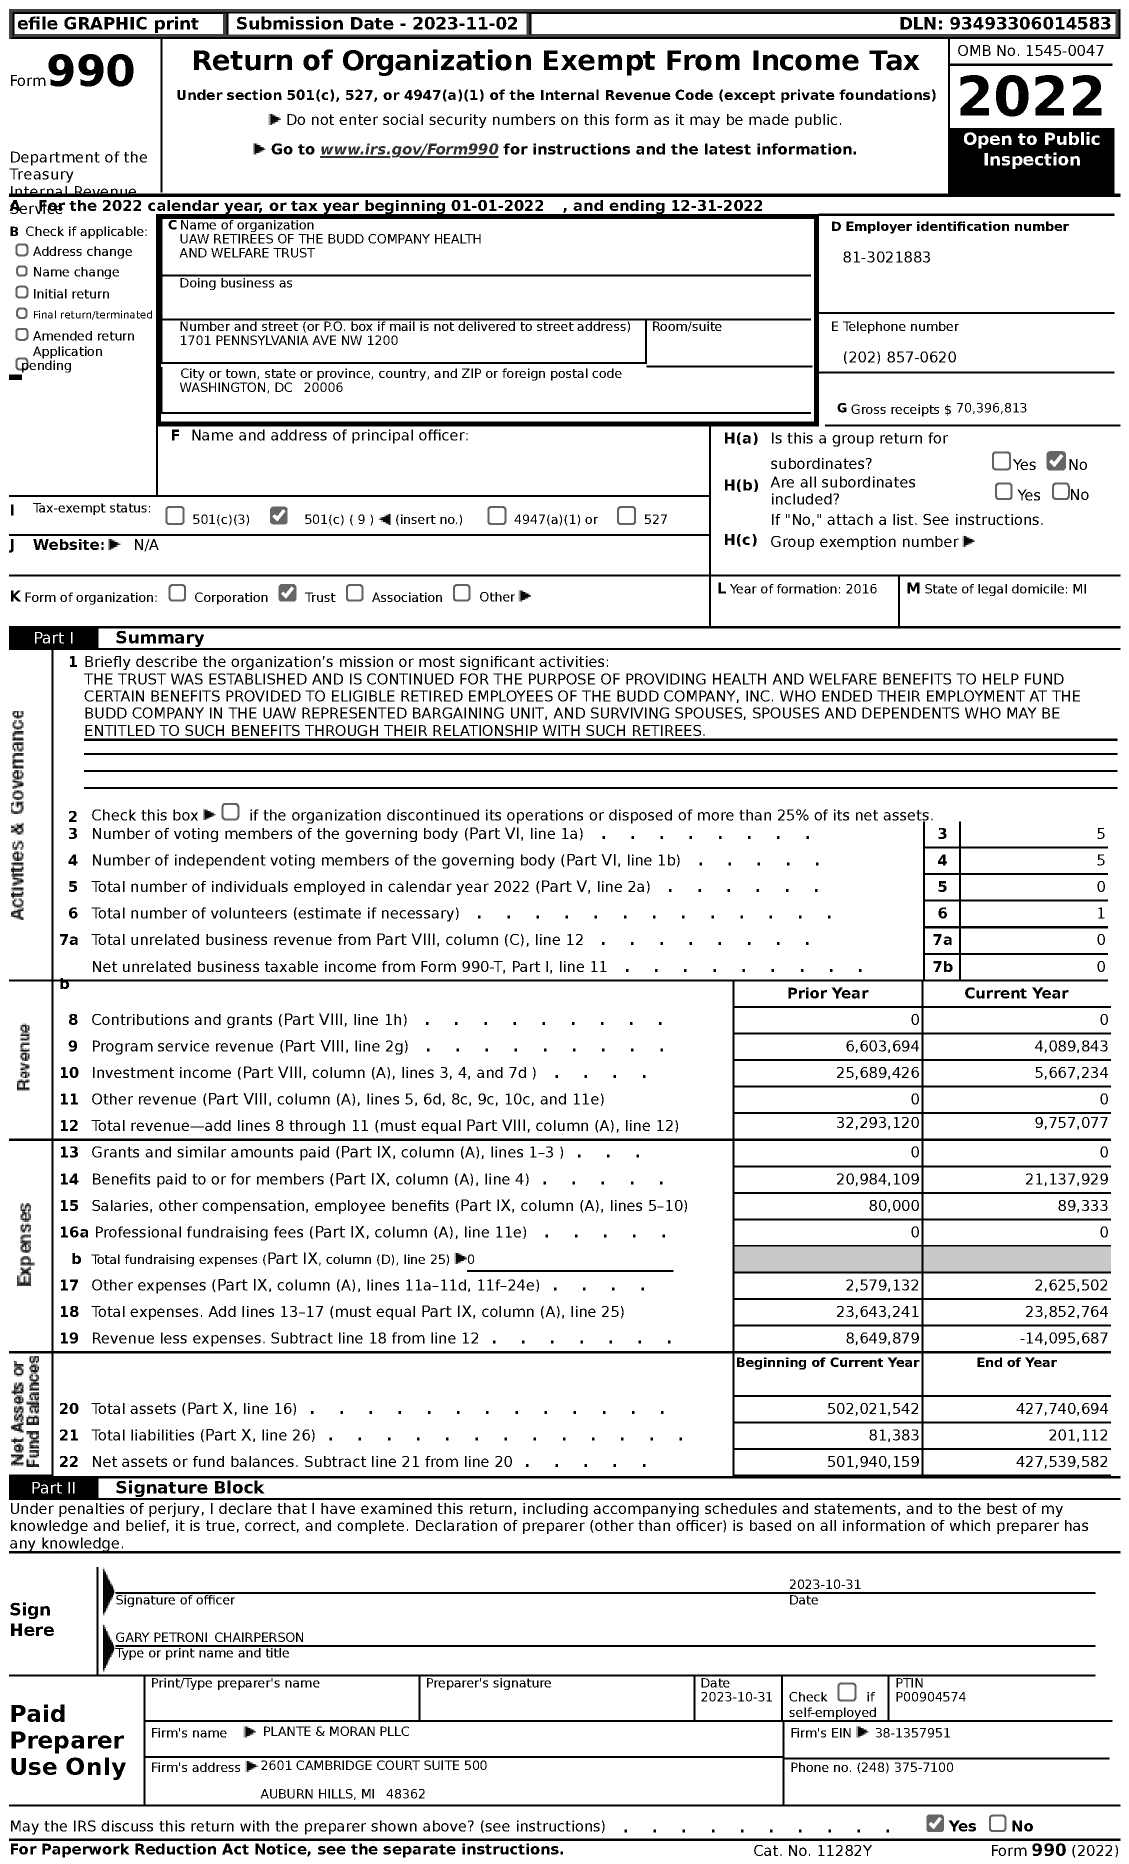 Image of first page of 2022 Form 990 for Uaw Retirees of the Budd Company Health and Welfare Trust